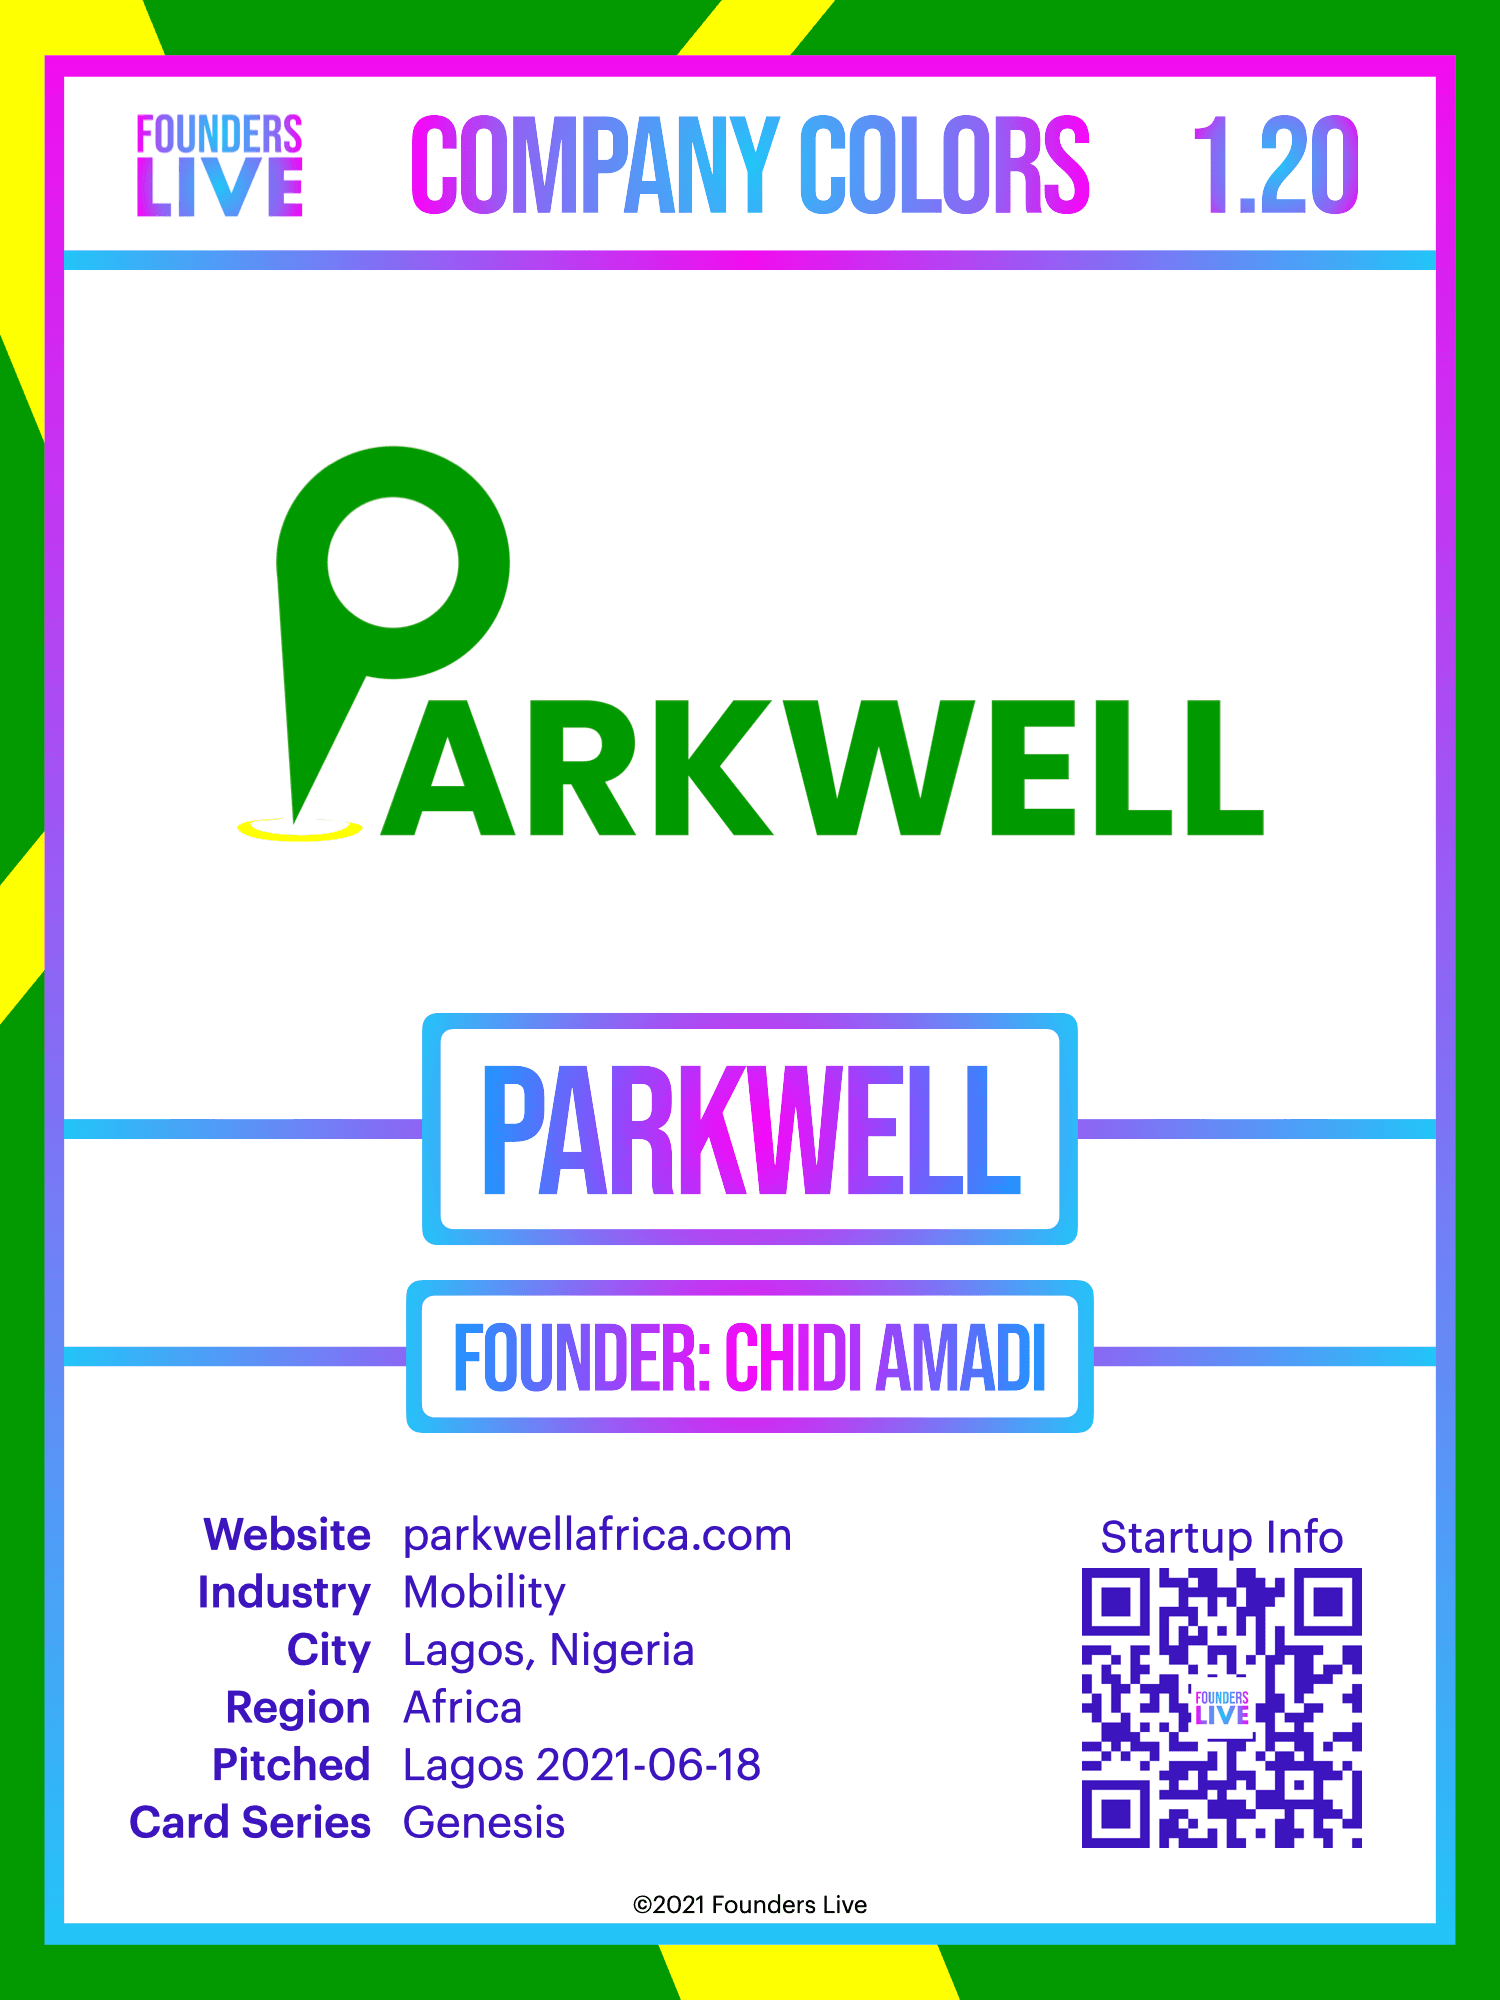 Parkwell - #1.20